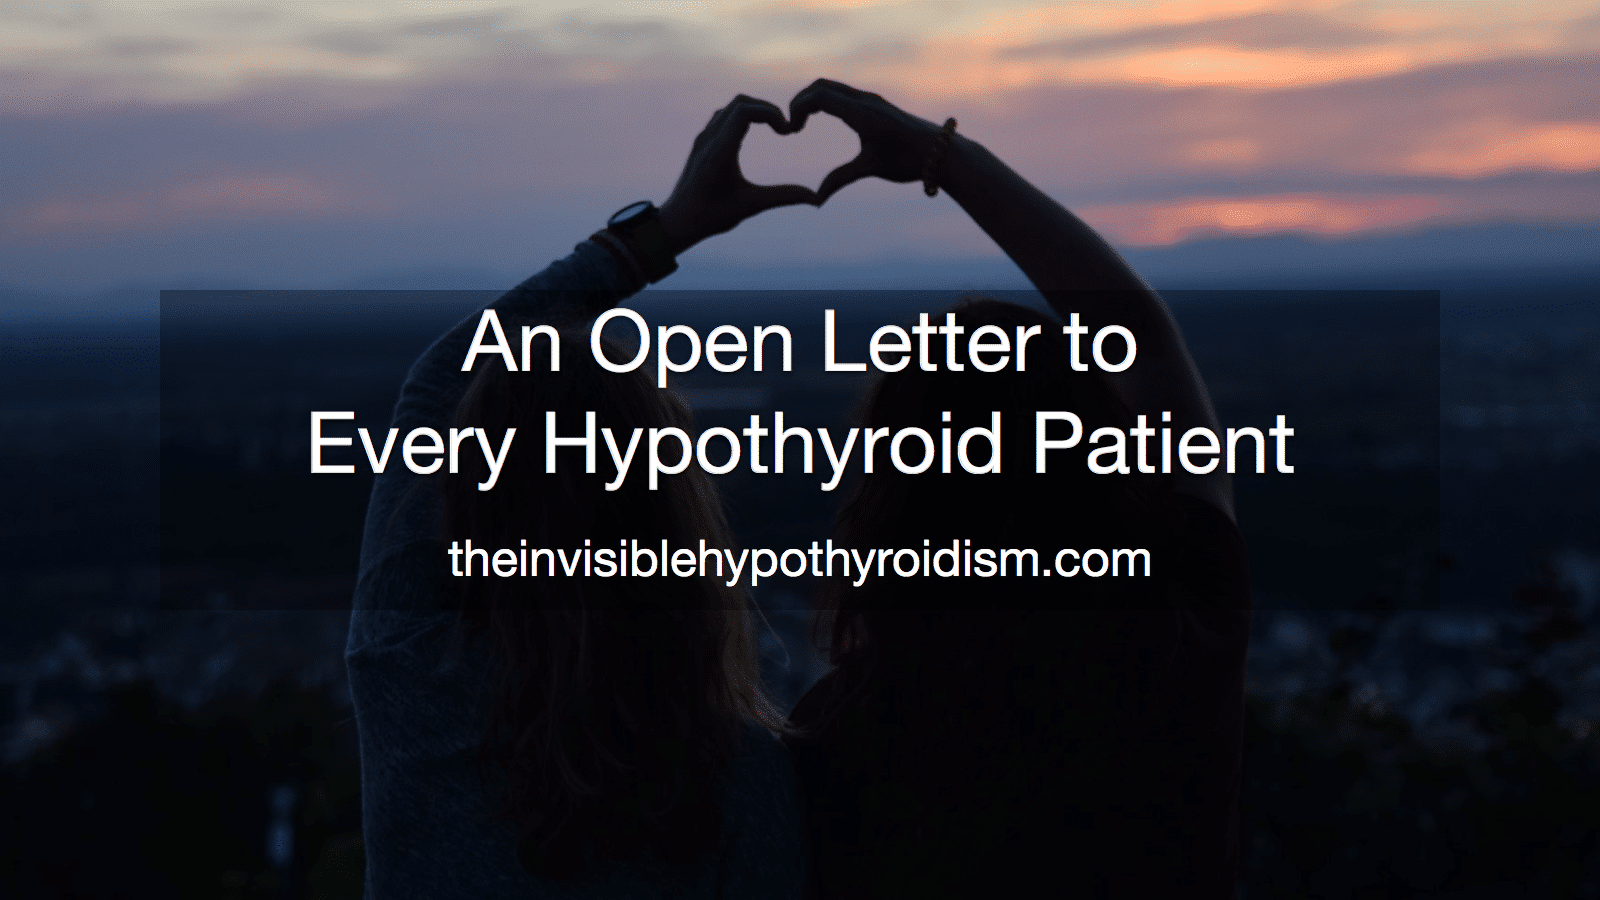 An Open Letter to Every Hypothyroid Patient